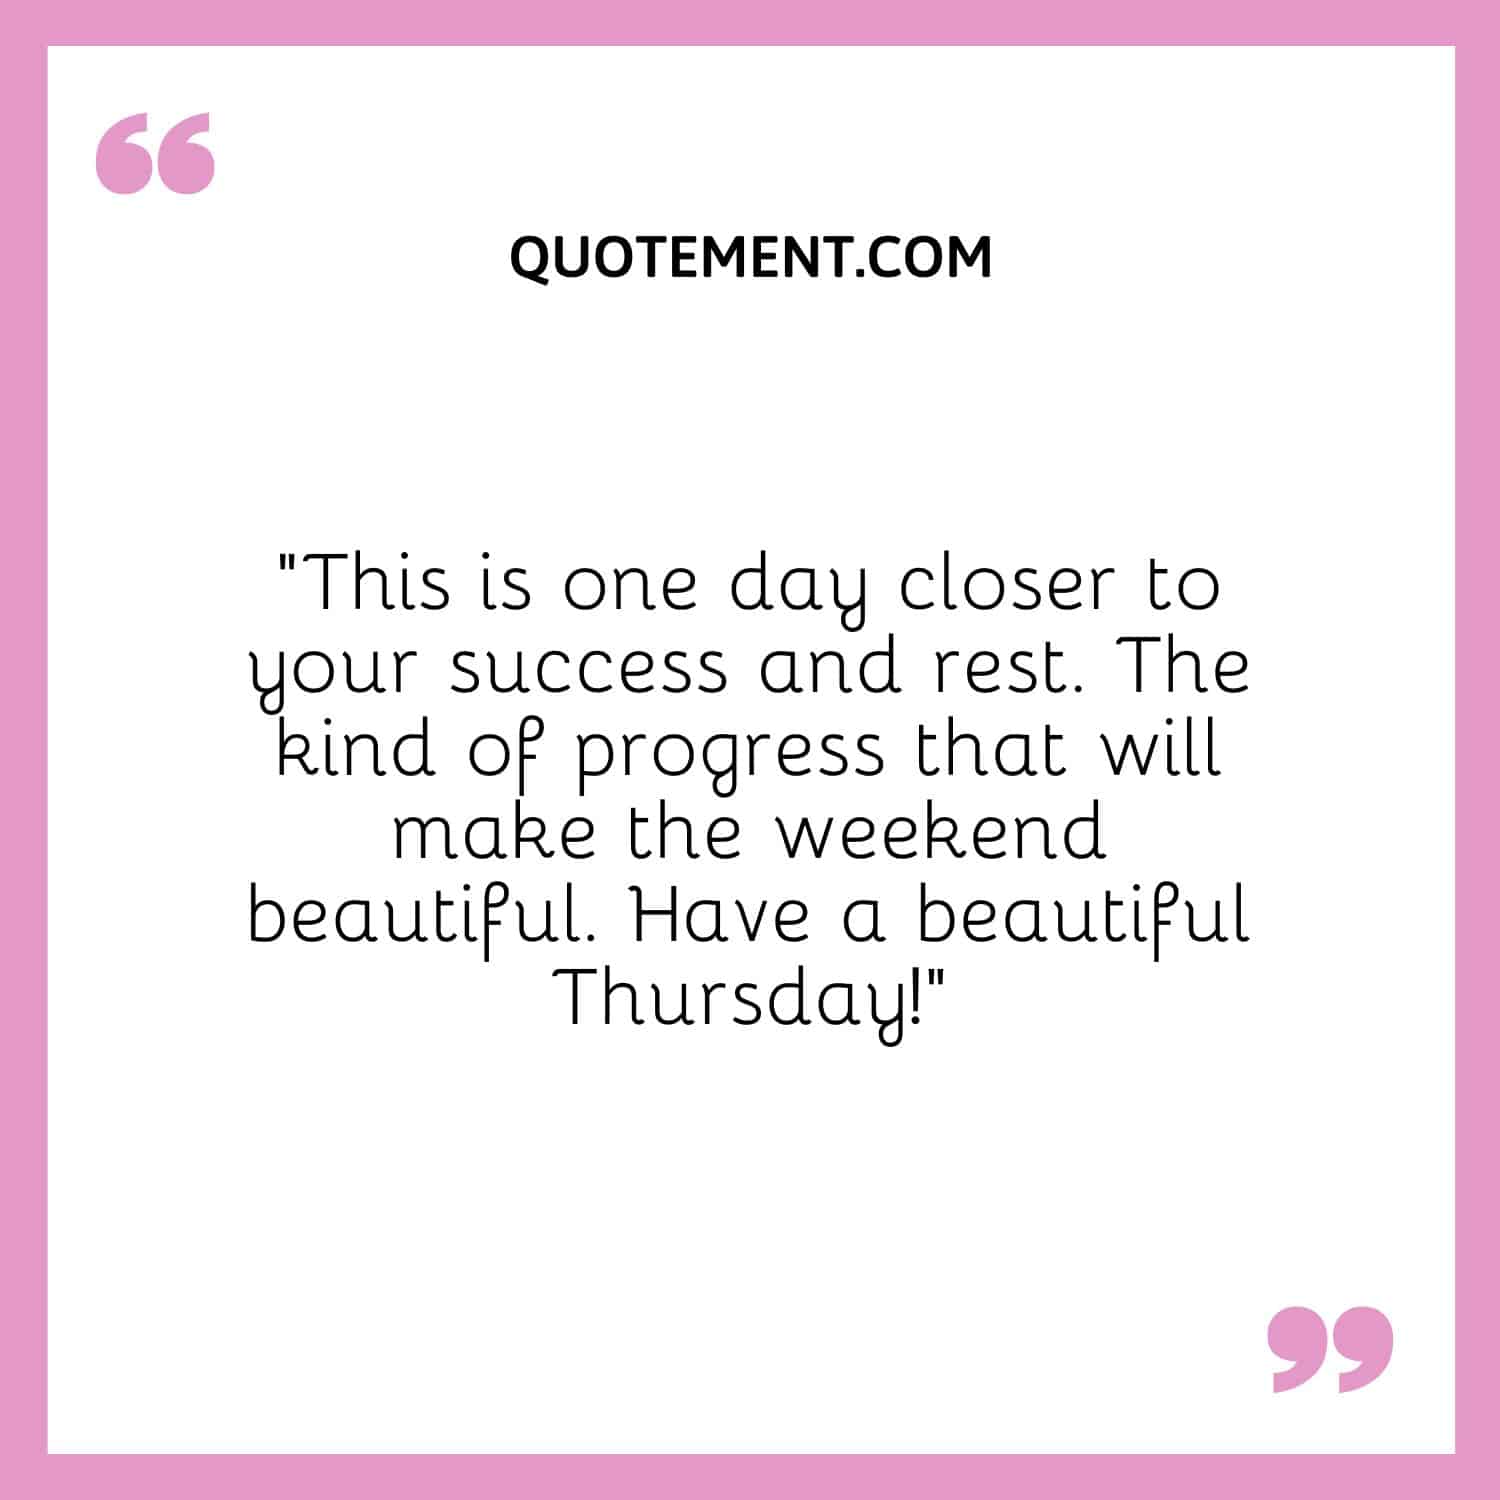 “This is one day closer to your success and rest. The kind of progress that will make the weekend beautiful. Have a beautiful Thursday!”